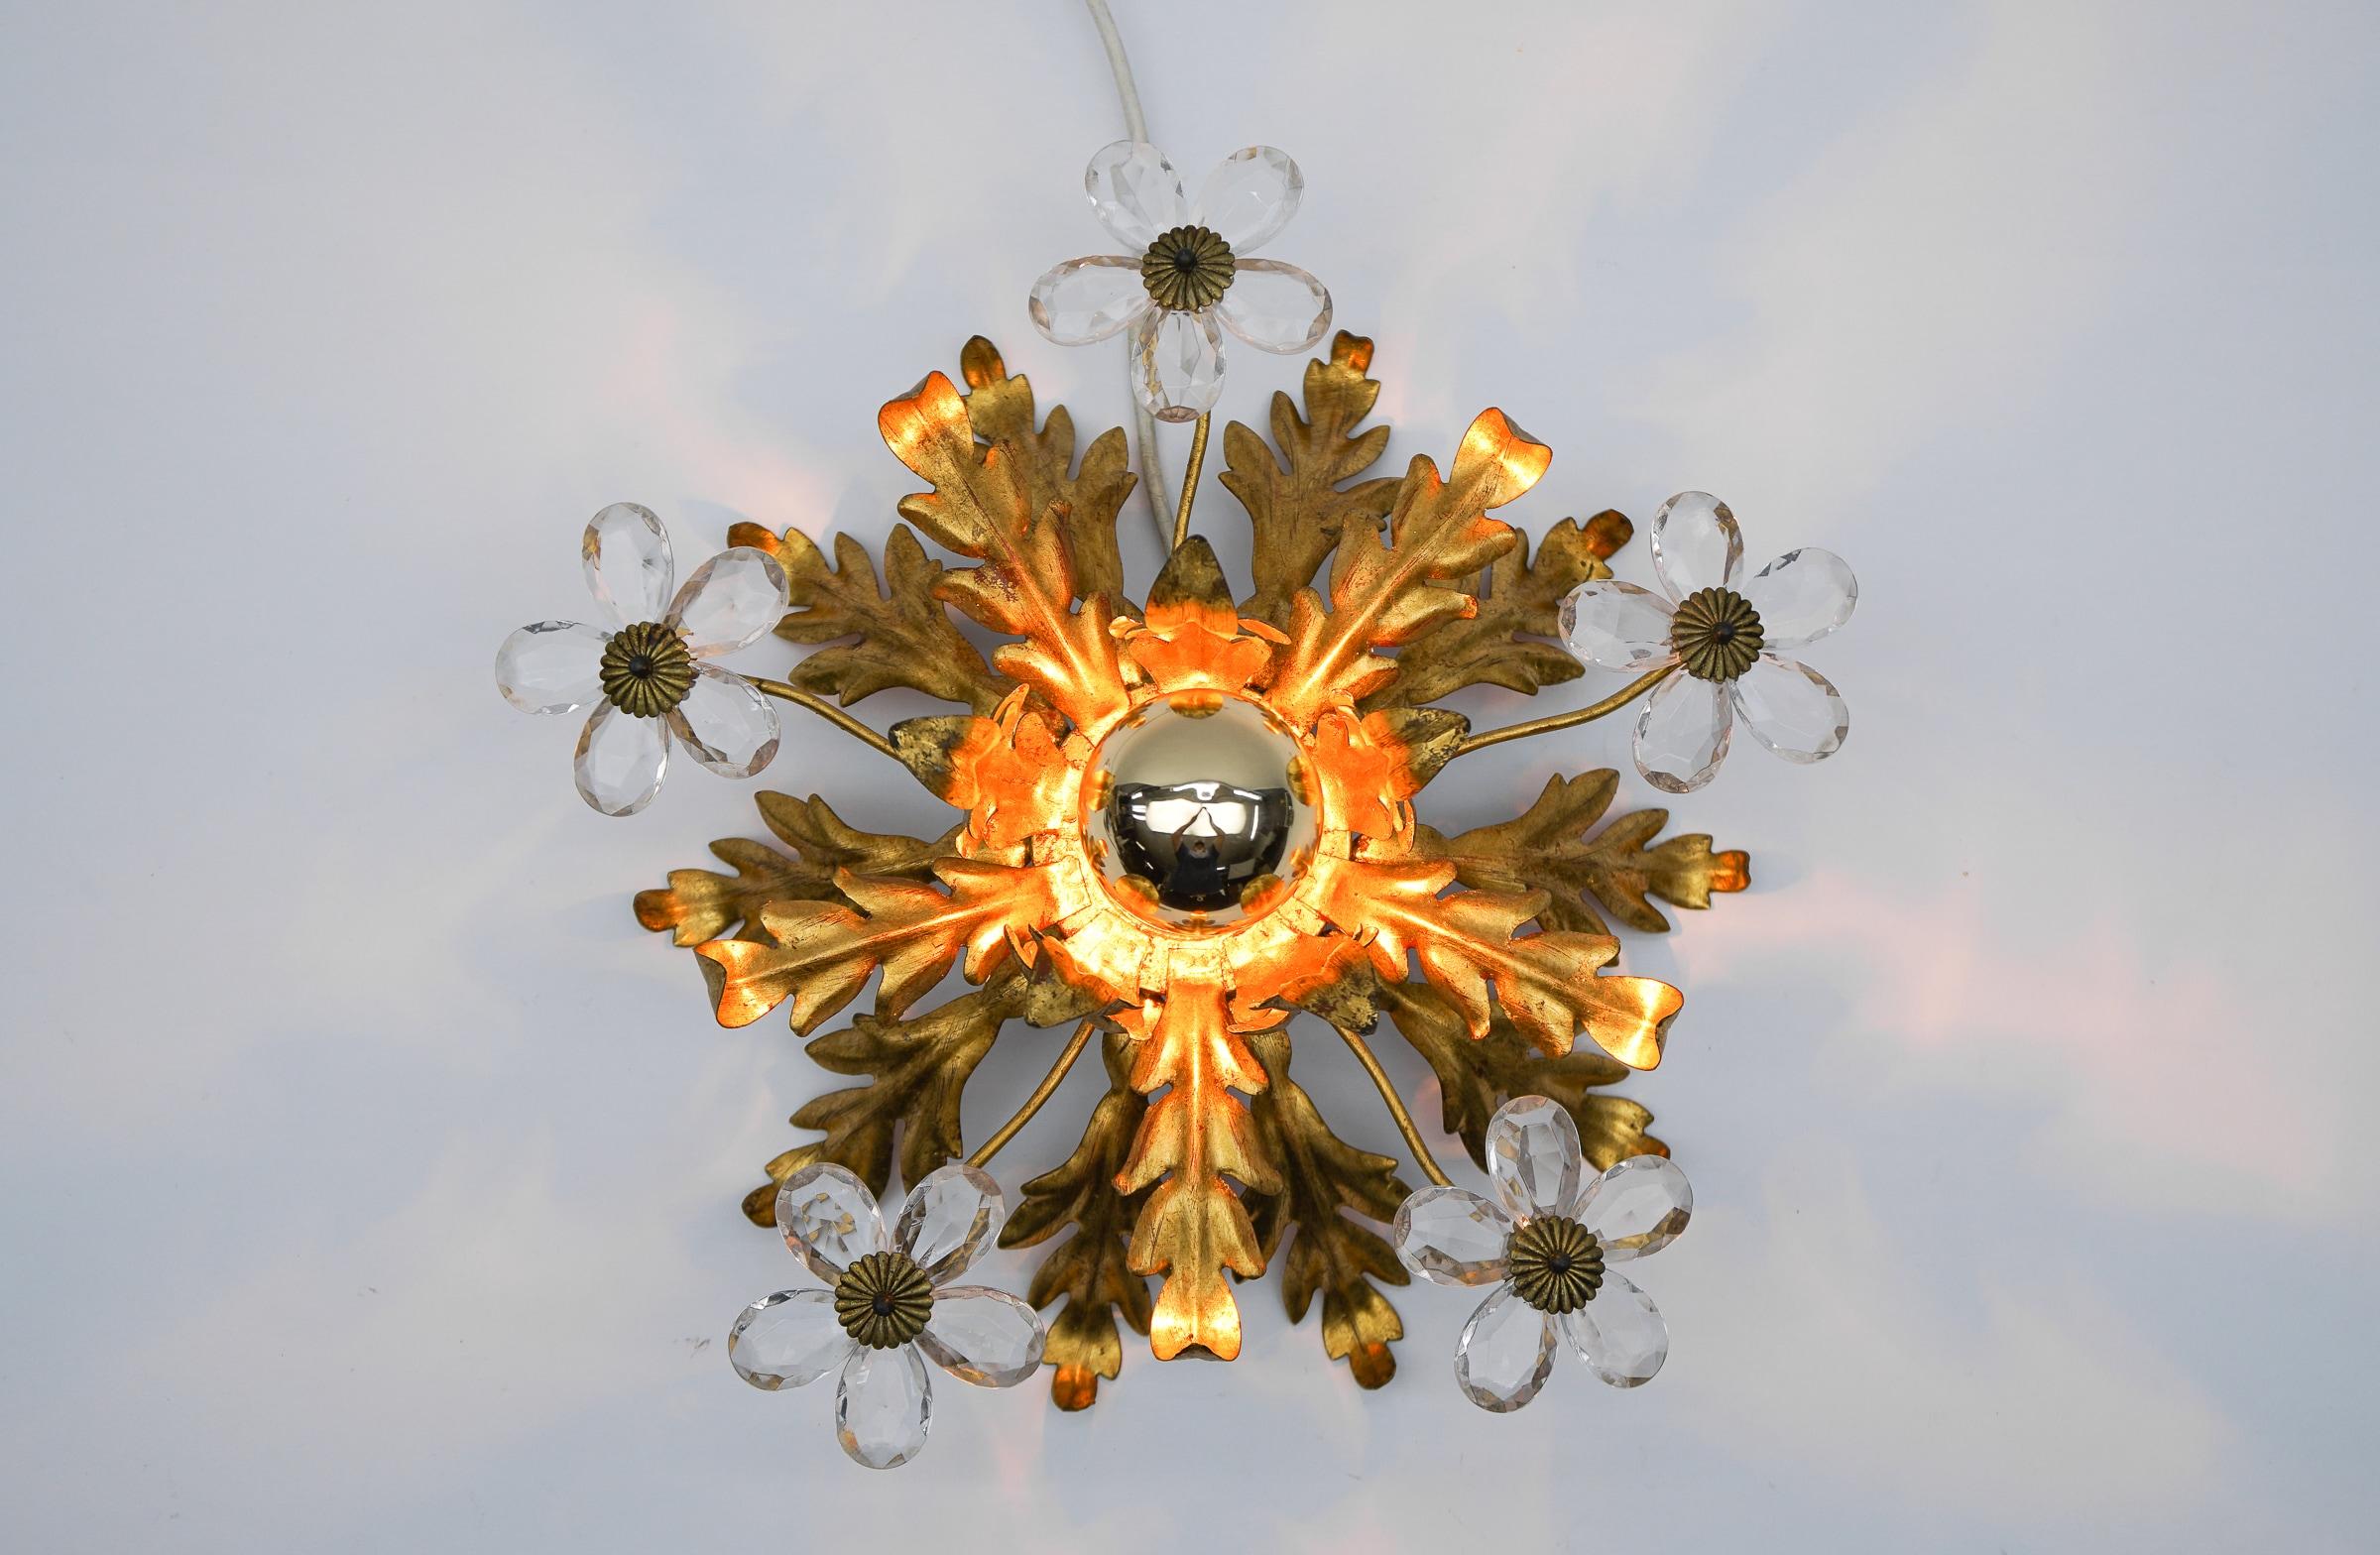 Crystal Glass and Metal Florentine Ceiling Lamp by Banci Firenze, 1960s For Sale 3